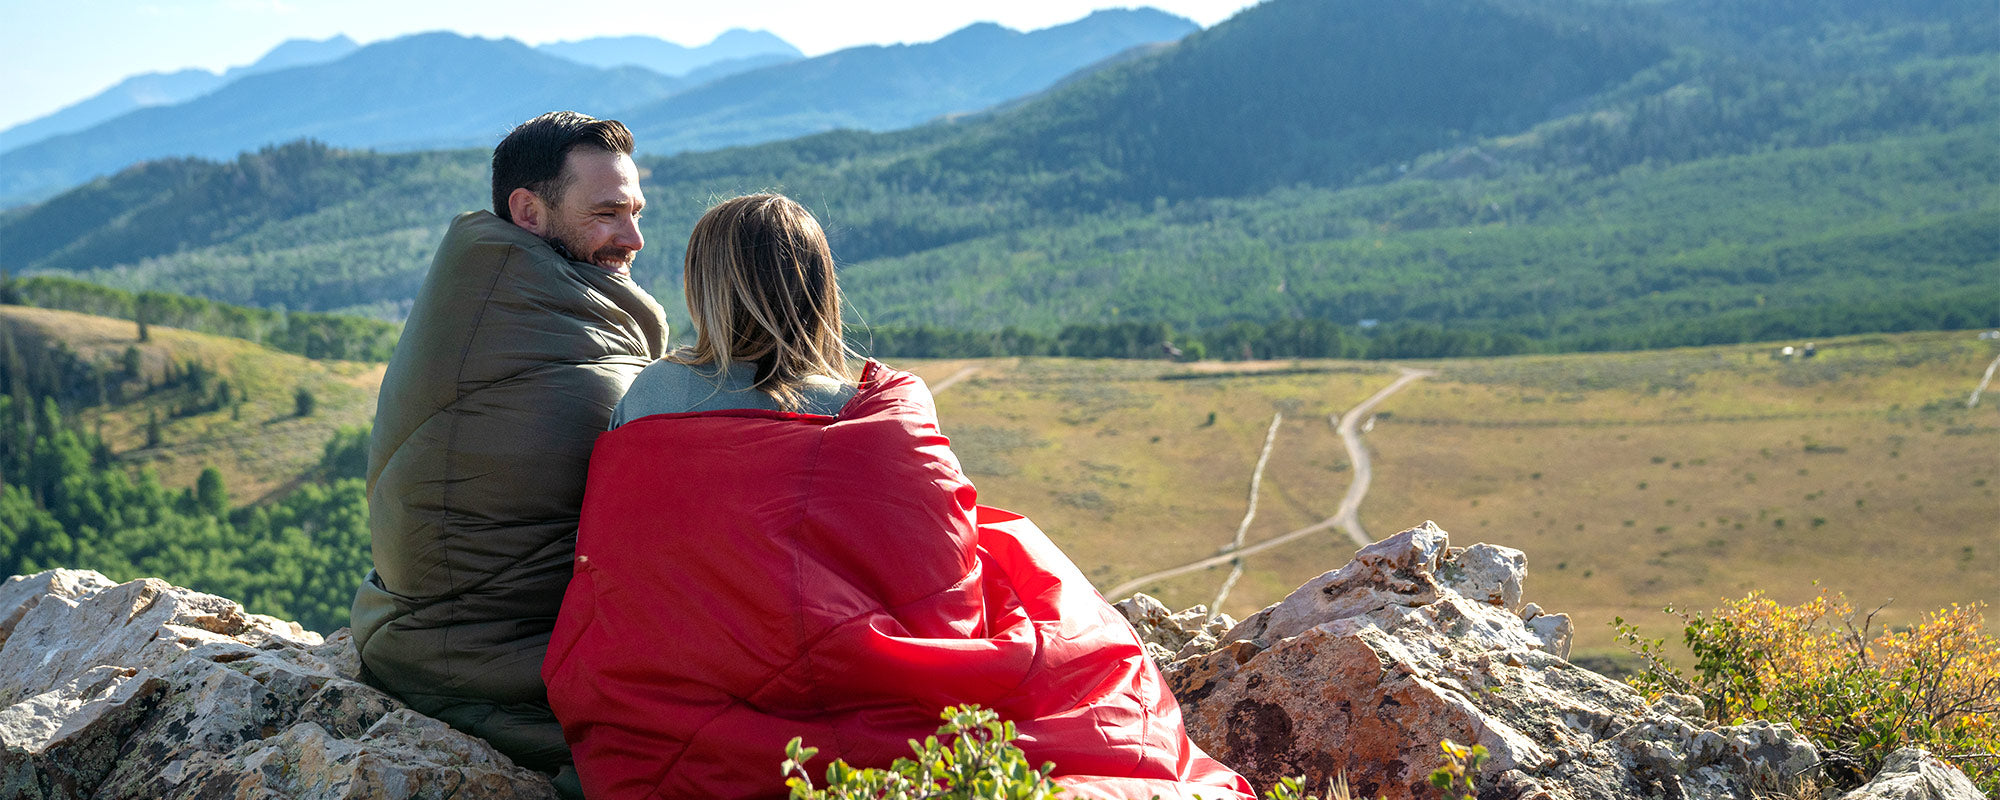 A man and a woman sit together on a rocky outcrop snuggled up in a new Celsius Sleeping Bag by TETON.